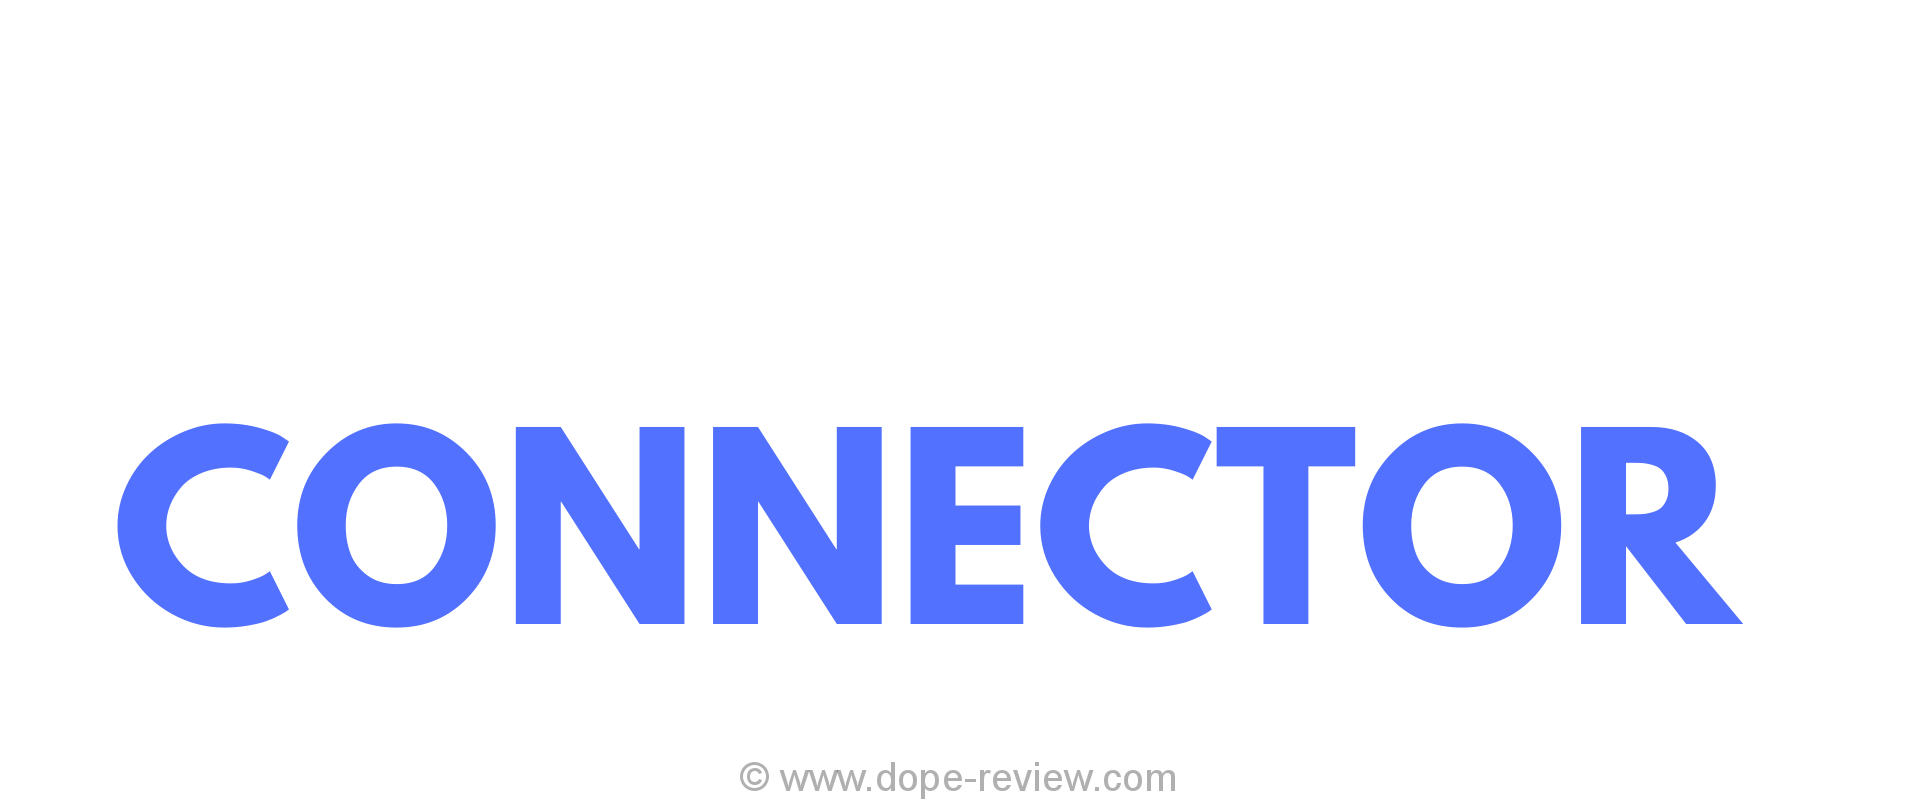 Text Connector Review